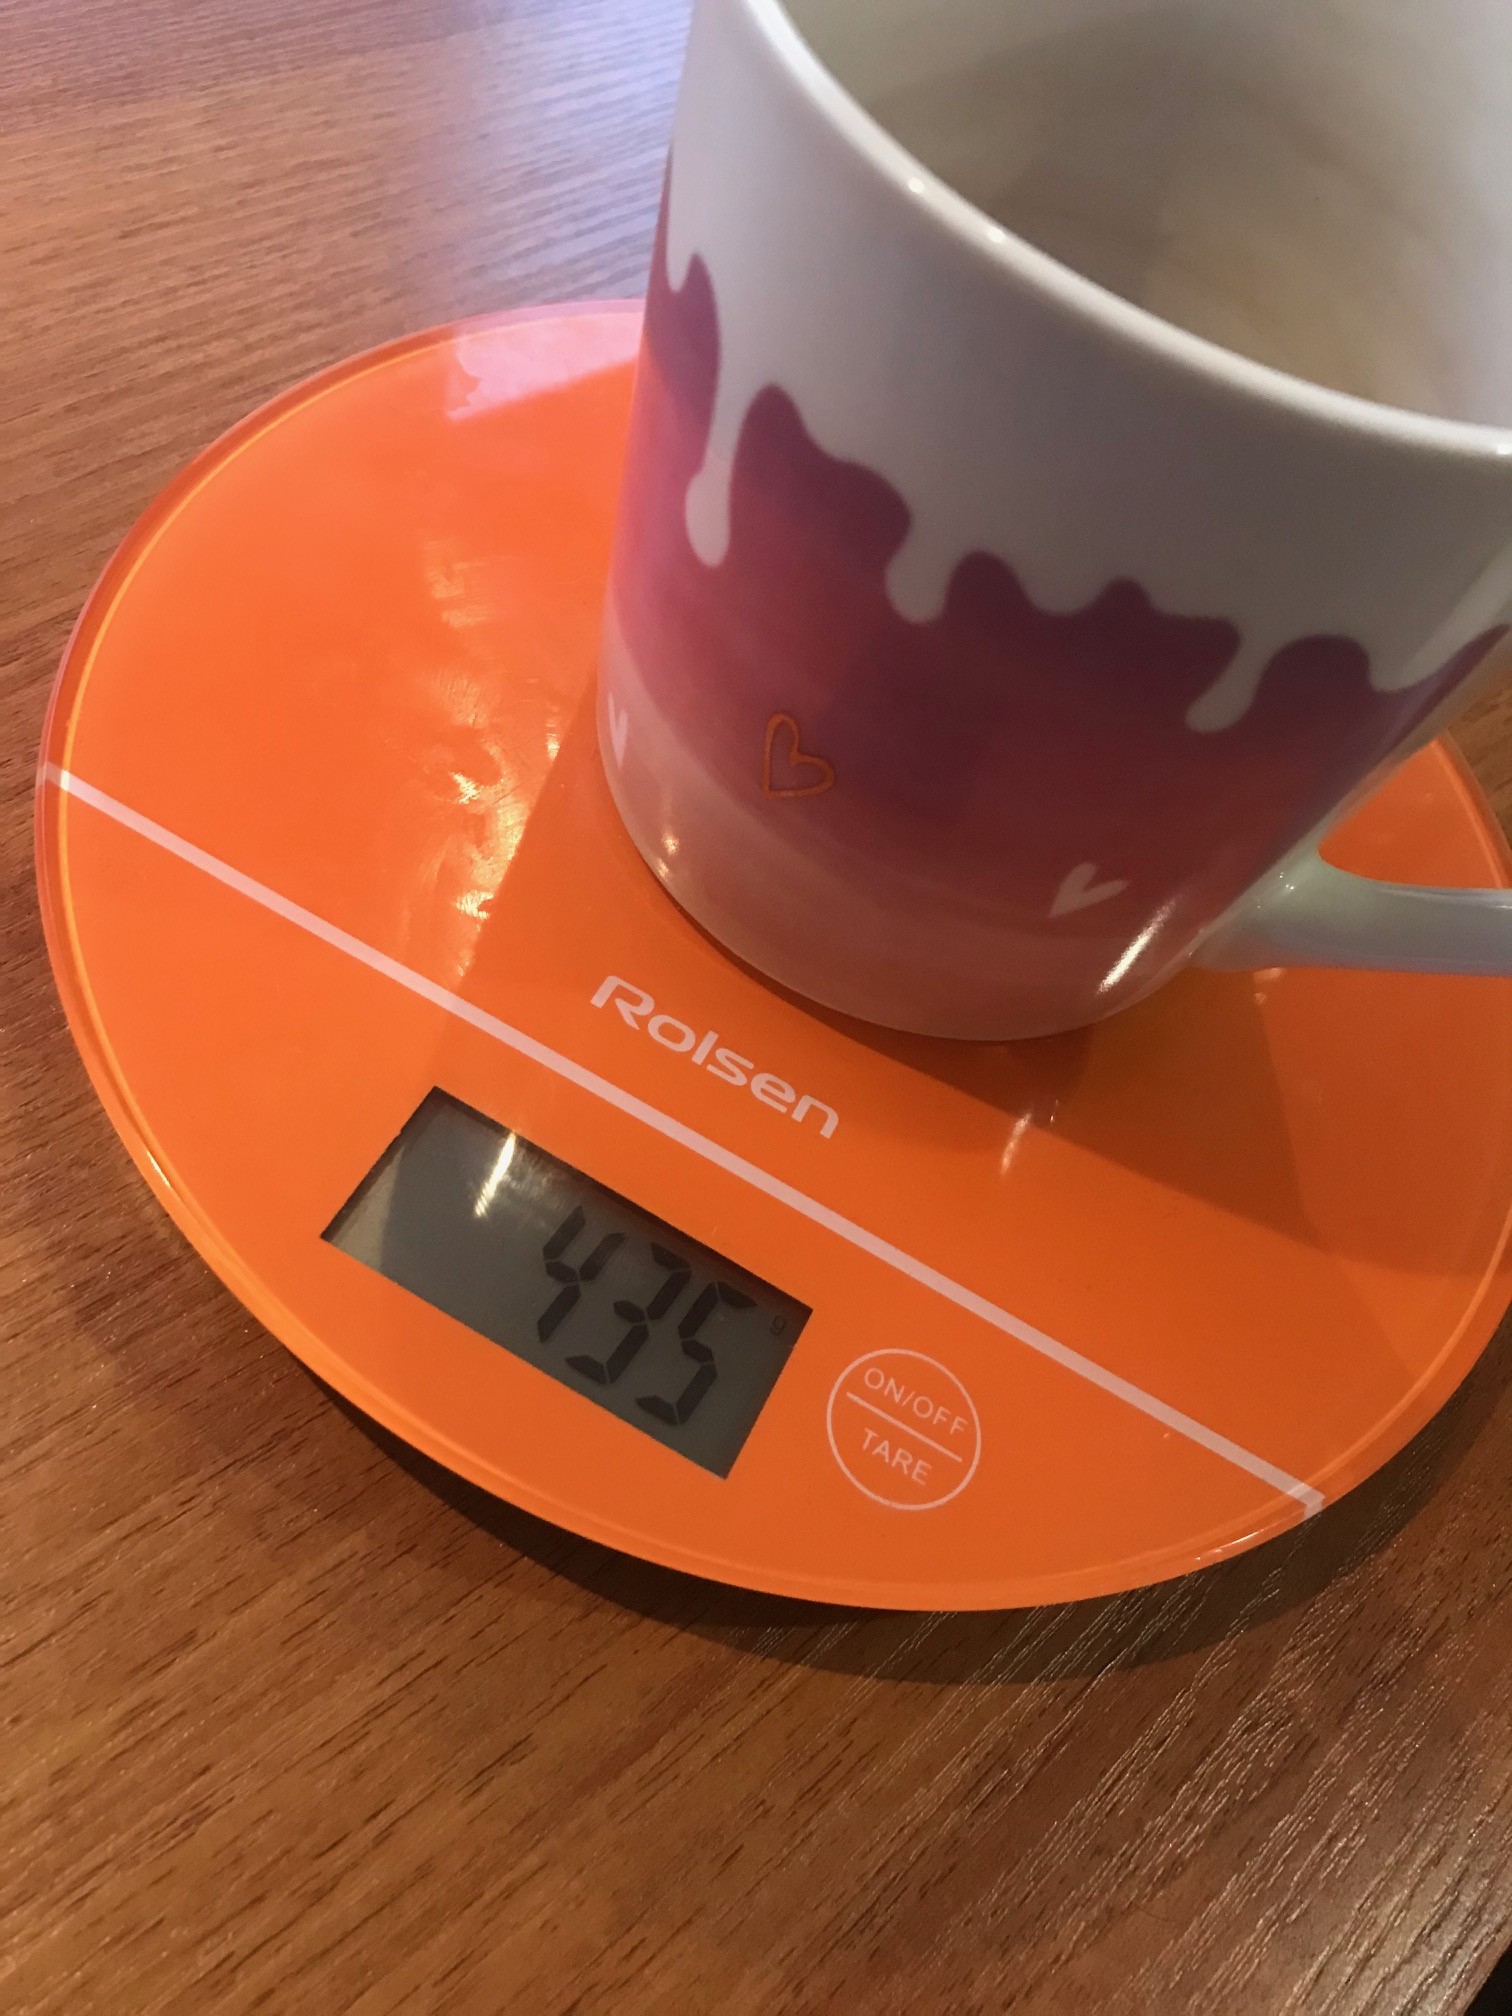 How much does a 350 ml cup weigh?